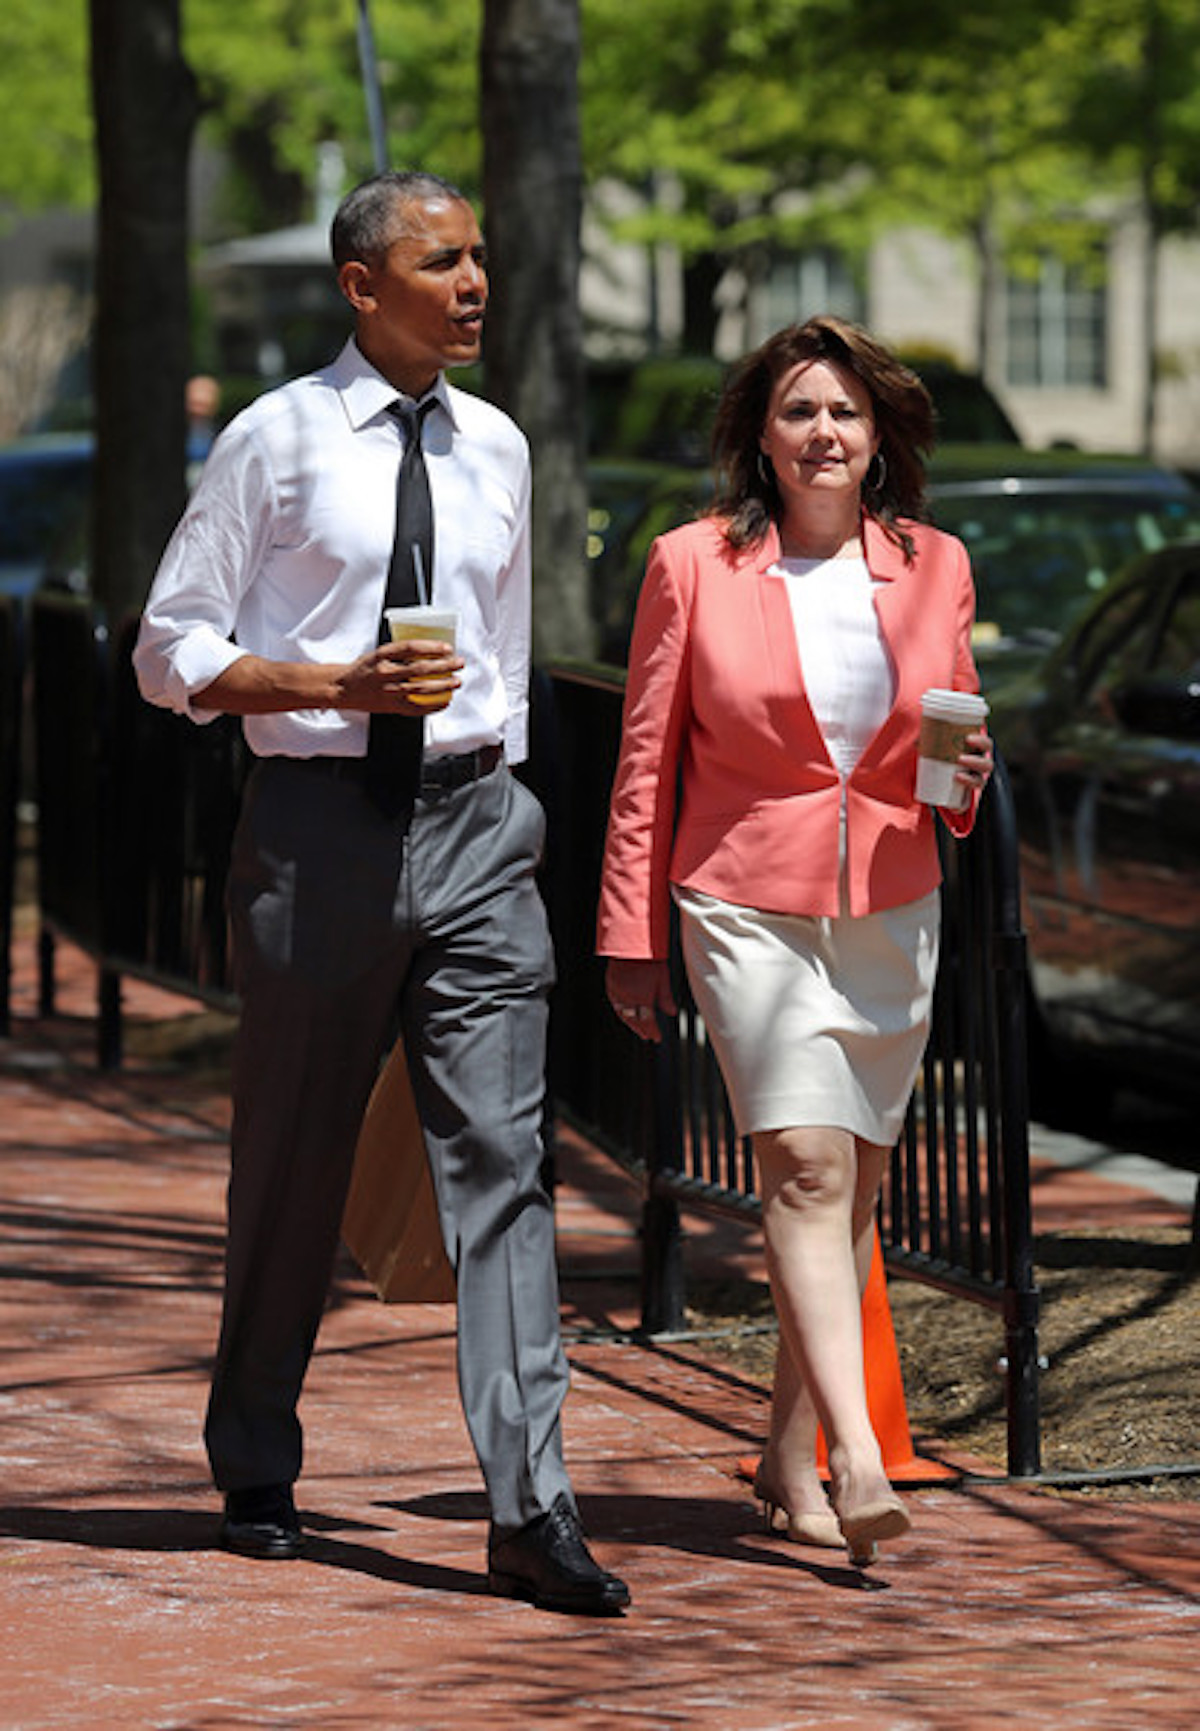 President Barack Obama, on a rare walkabout in D.C., with the National Teacher of the Year Shanna Peeples, Washington, DC, 2015. Shanna shares, “He bought me the chai tea that I’m holding.” Photo courtesy of Shanna Peeples.